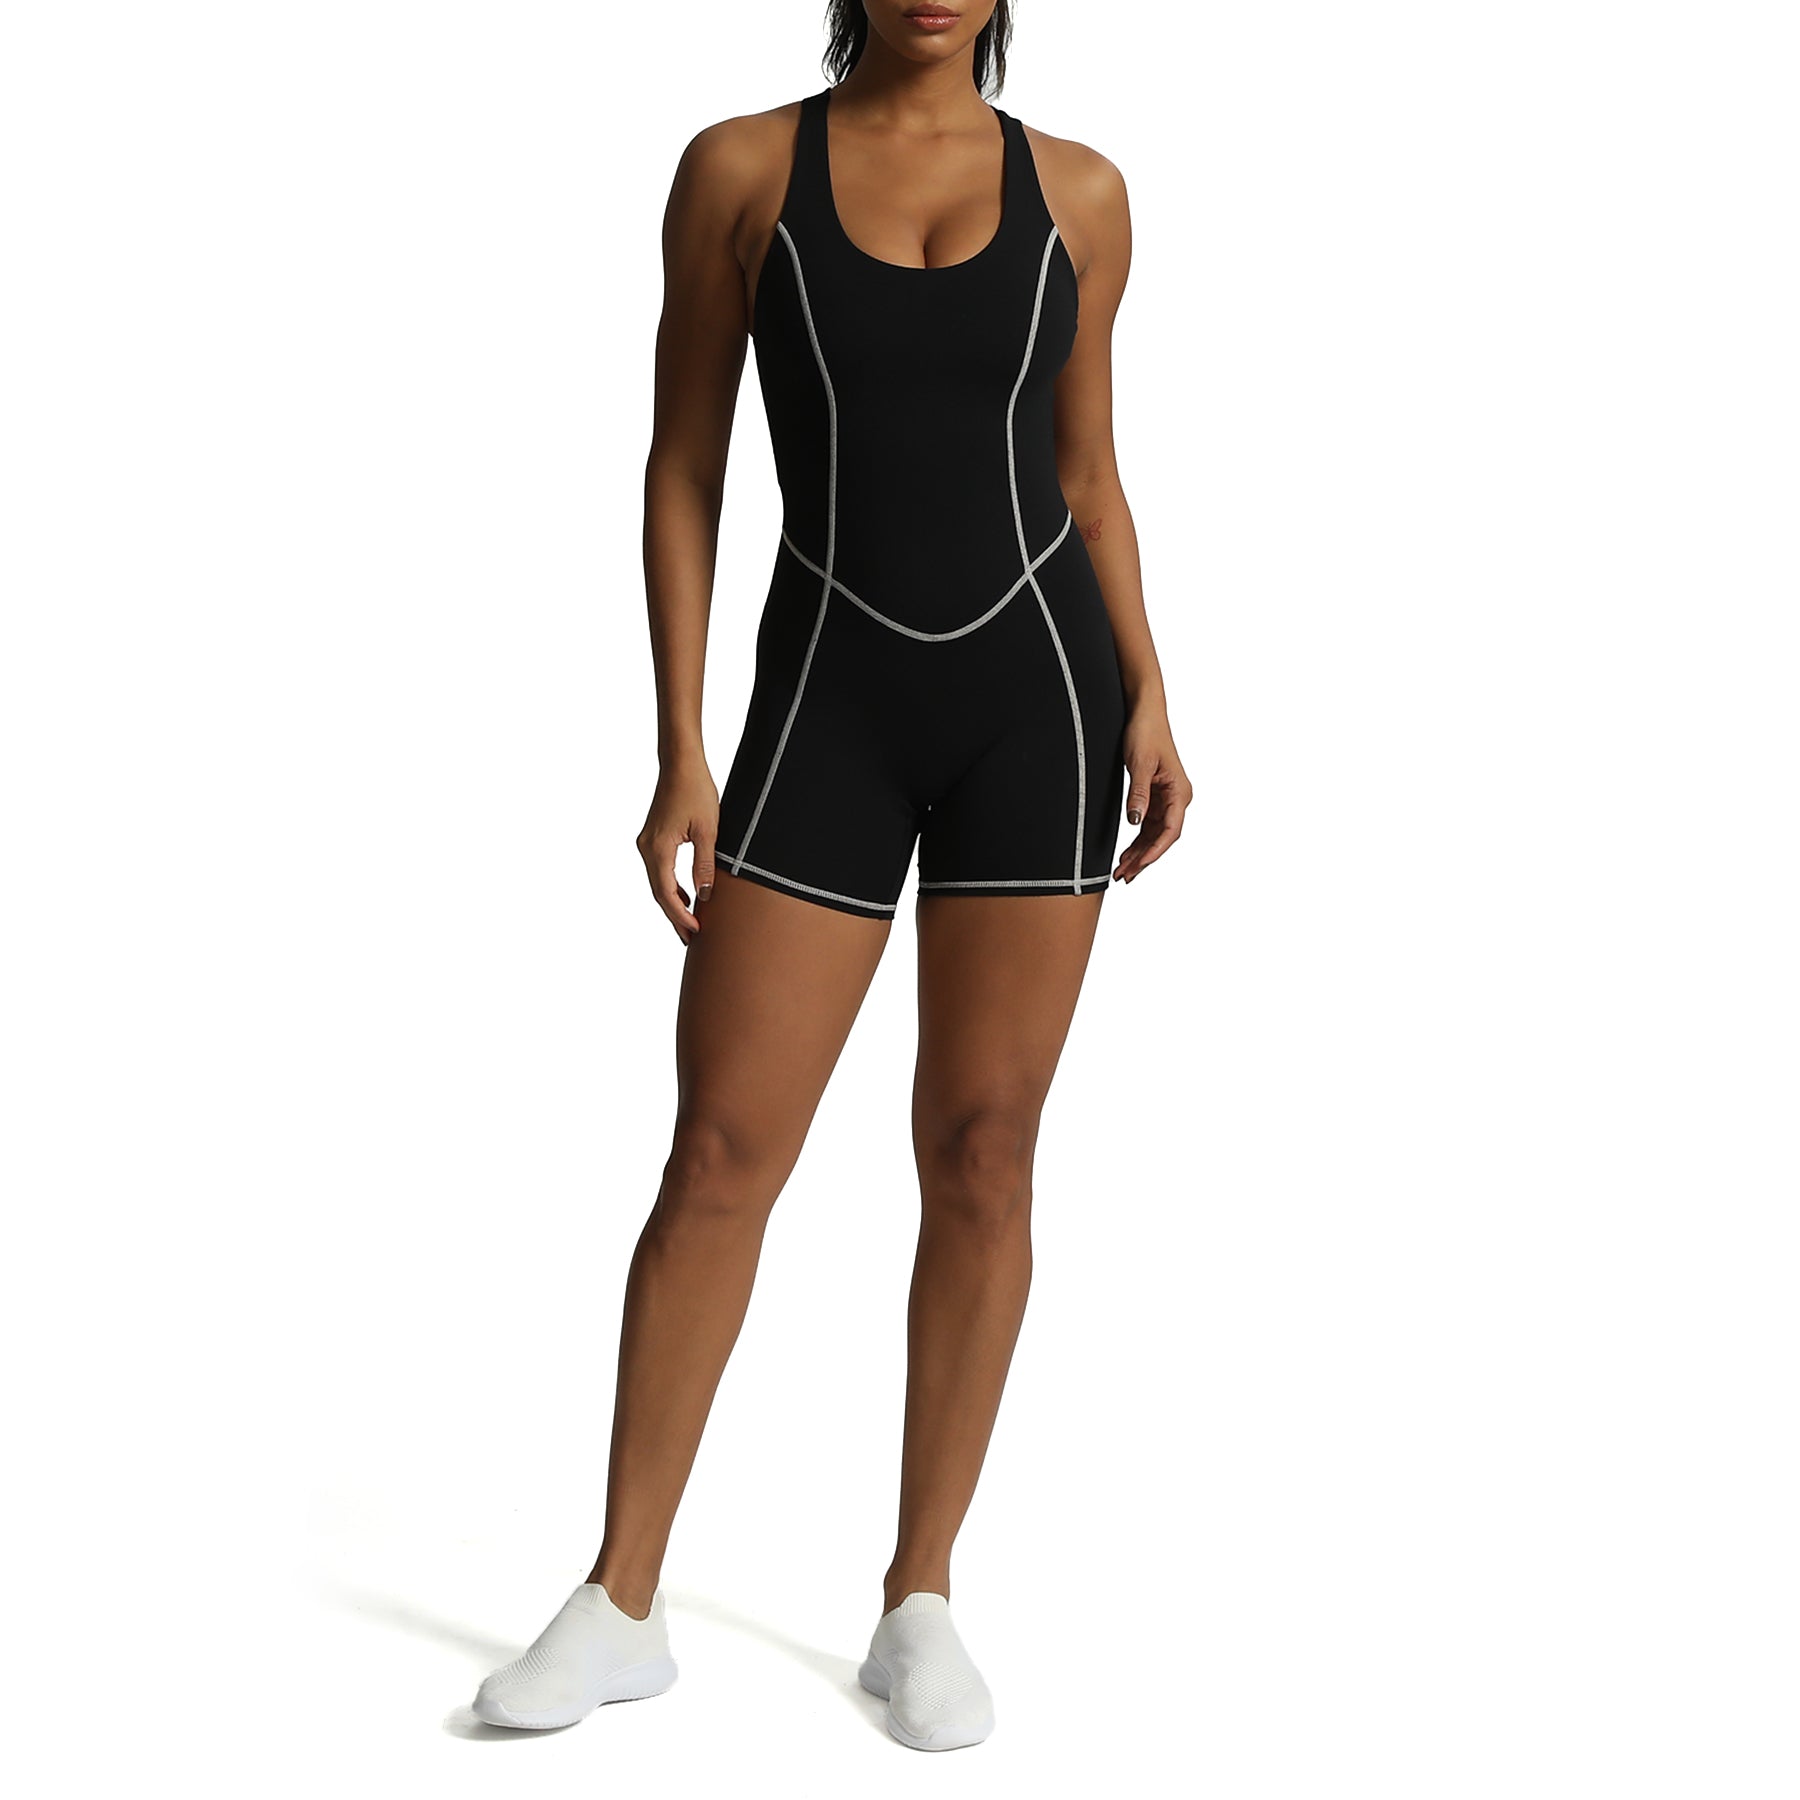 Aoxjox "Lexi Lined" Adjustable Shorts Bodysuit